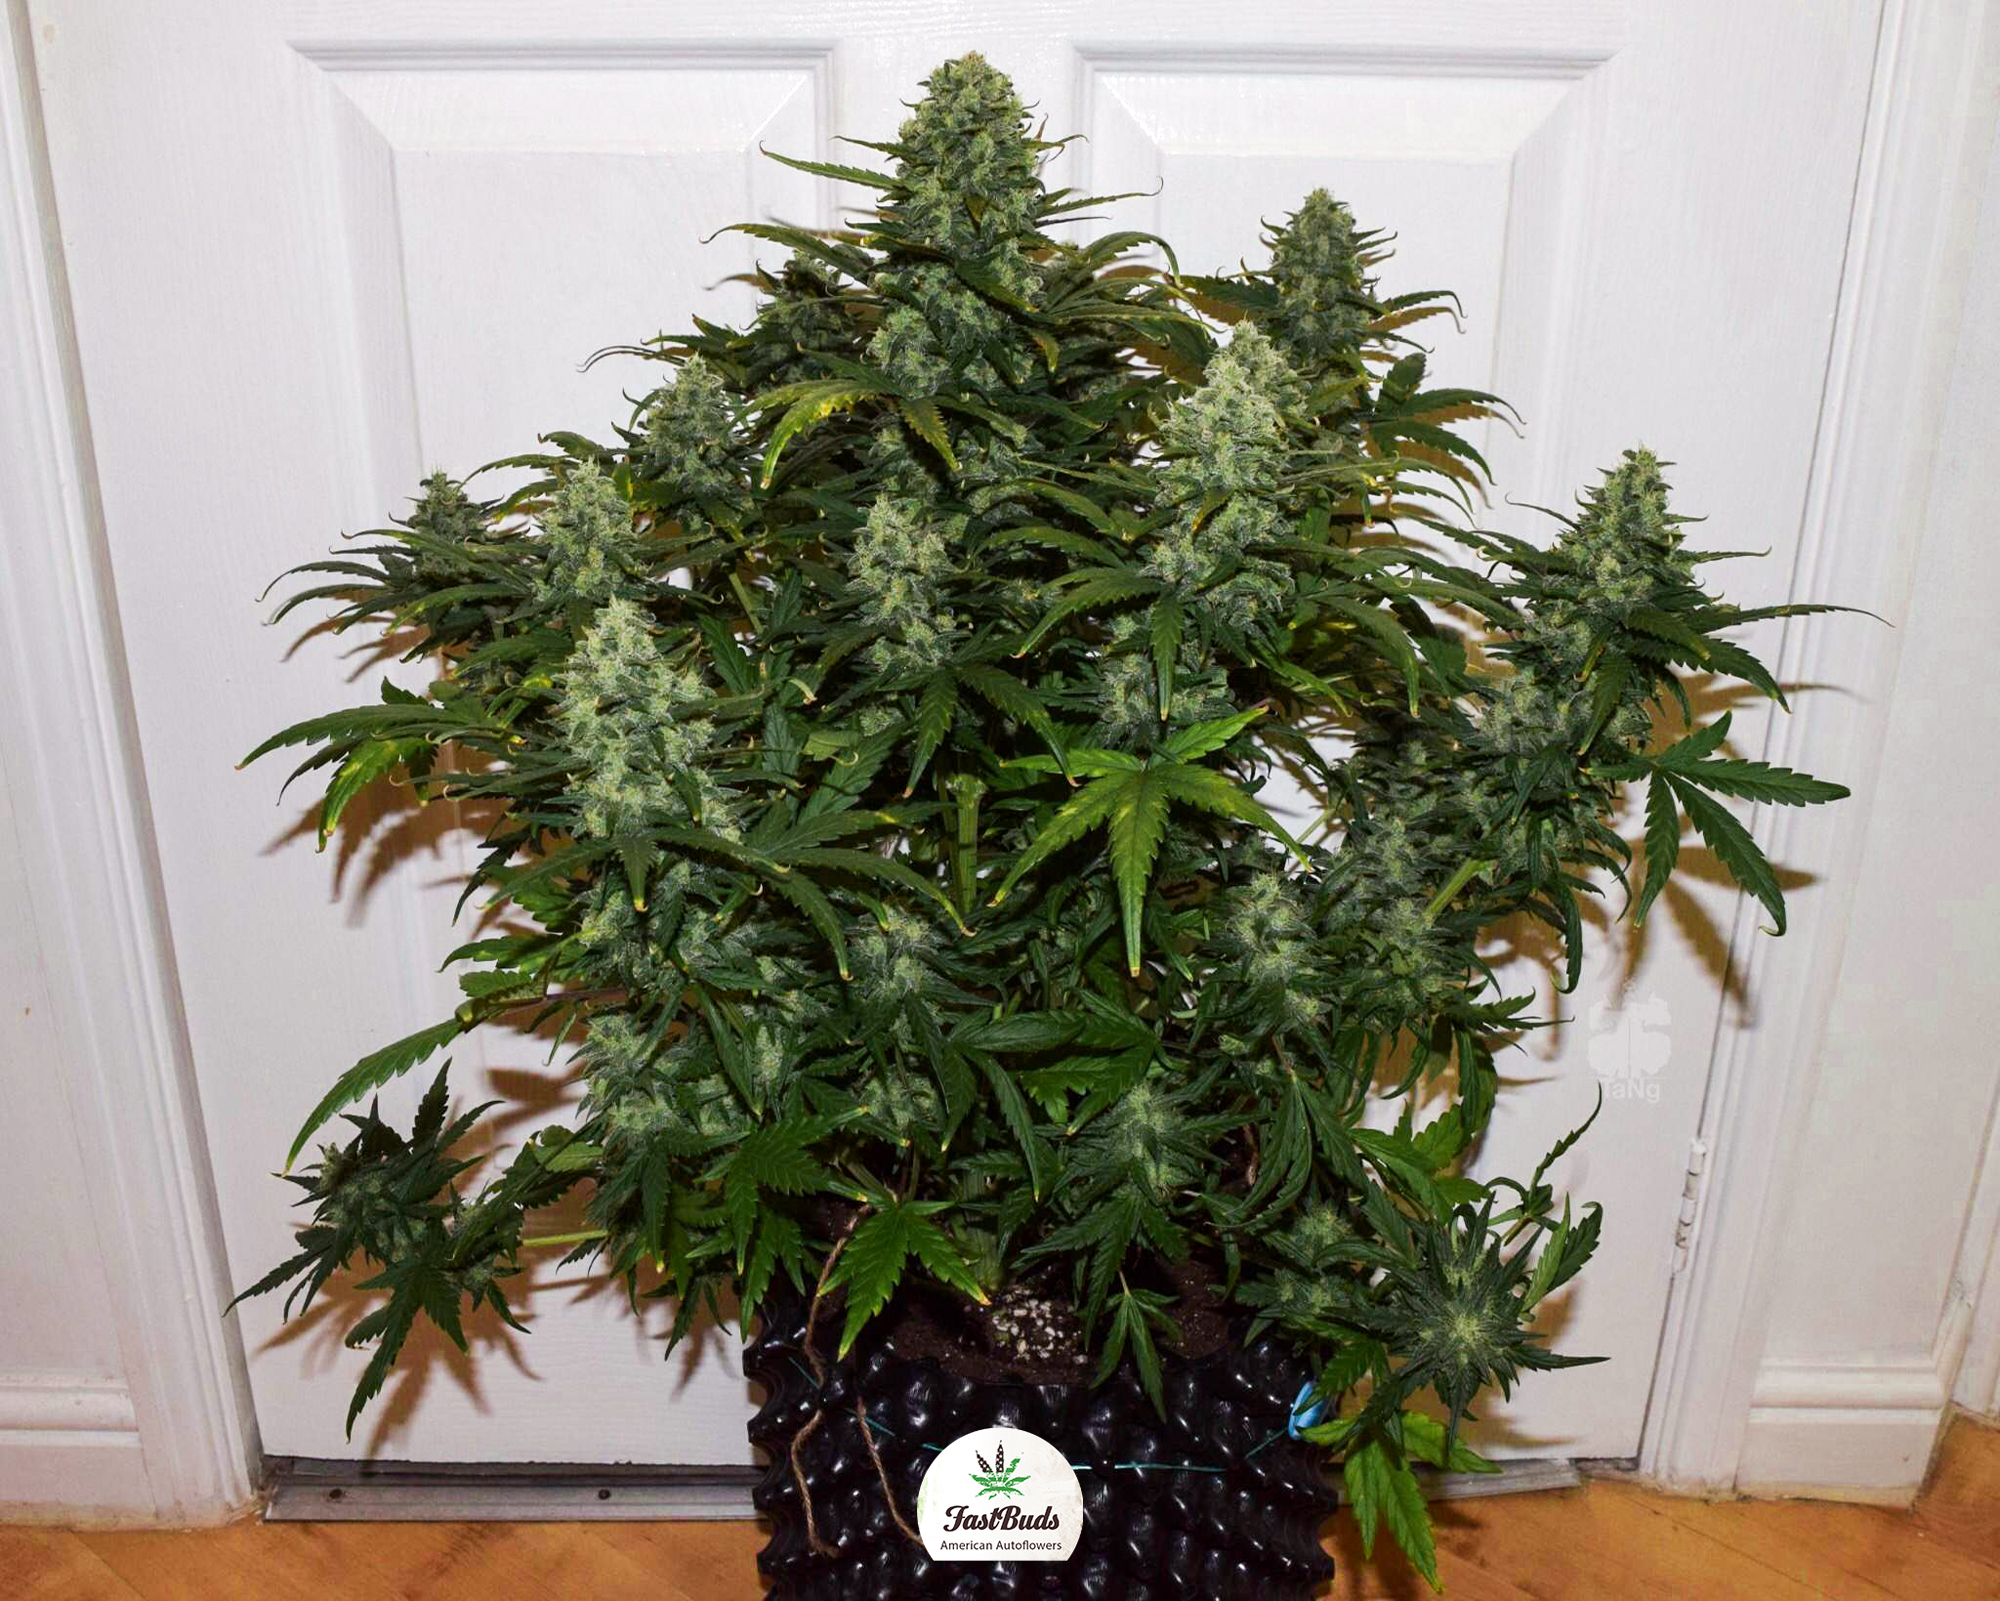 Mexican Airlines - Auto-Flower - Southern Oregon Seeds